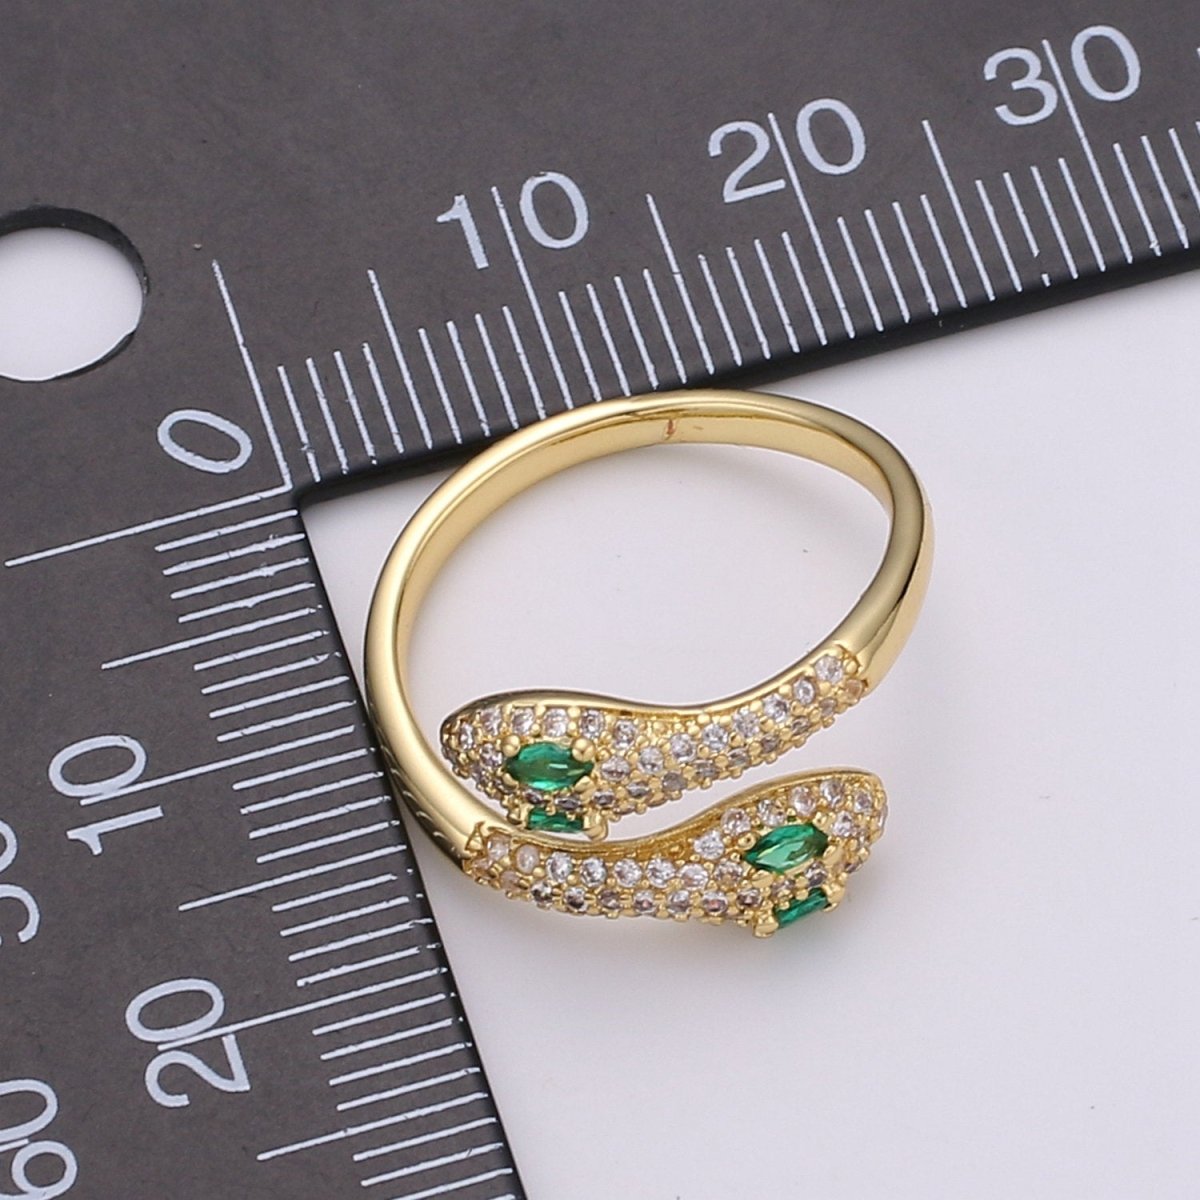 OS Snake ring, Serpent ring, dainty ring, spiral snake ring, gold ring, wrap ring, snake gold ring, vintage jewelry CZ Micro Pave Ring R-093 - DLUXCA